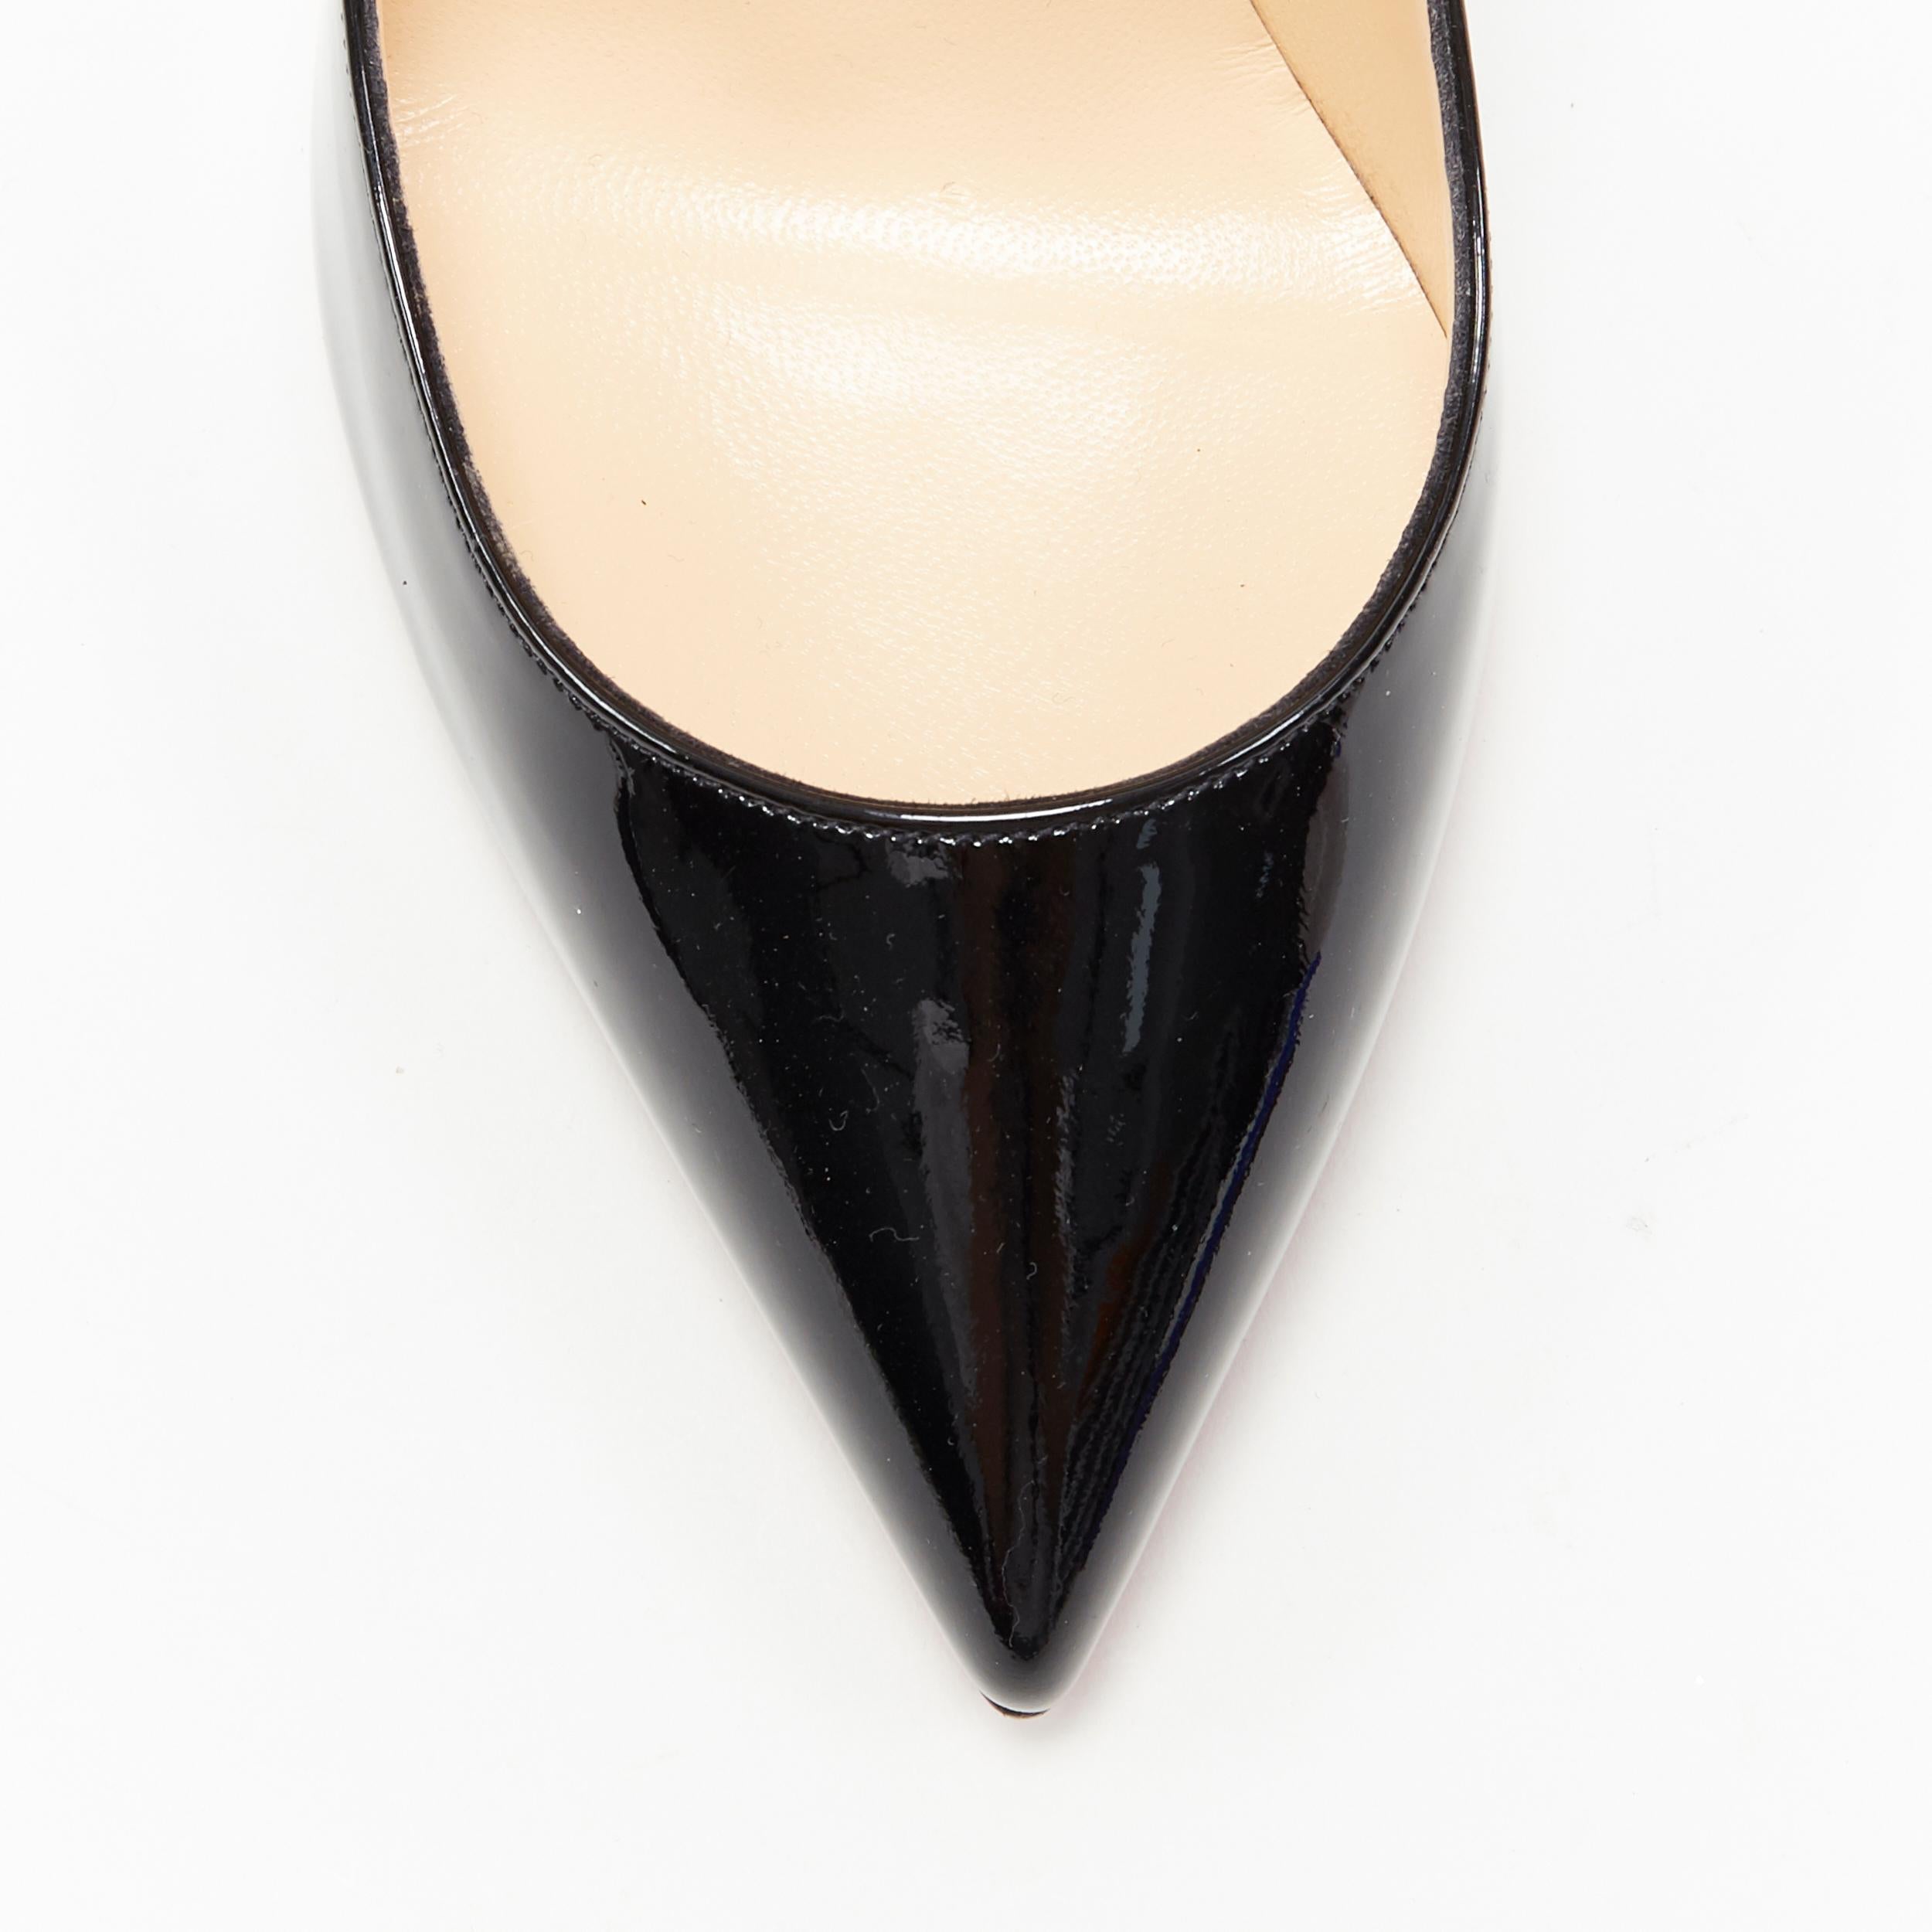 CHRISTIAN LOUBOUTIN black patent pointed toe pigalle high heel pump EU36.5 2